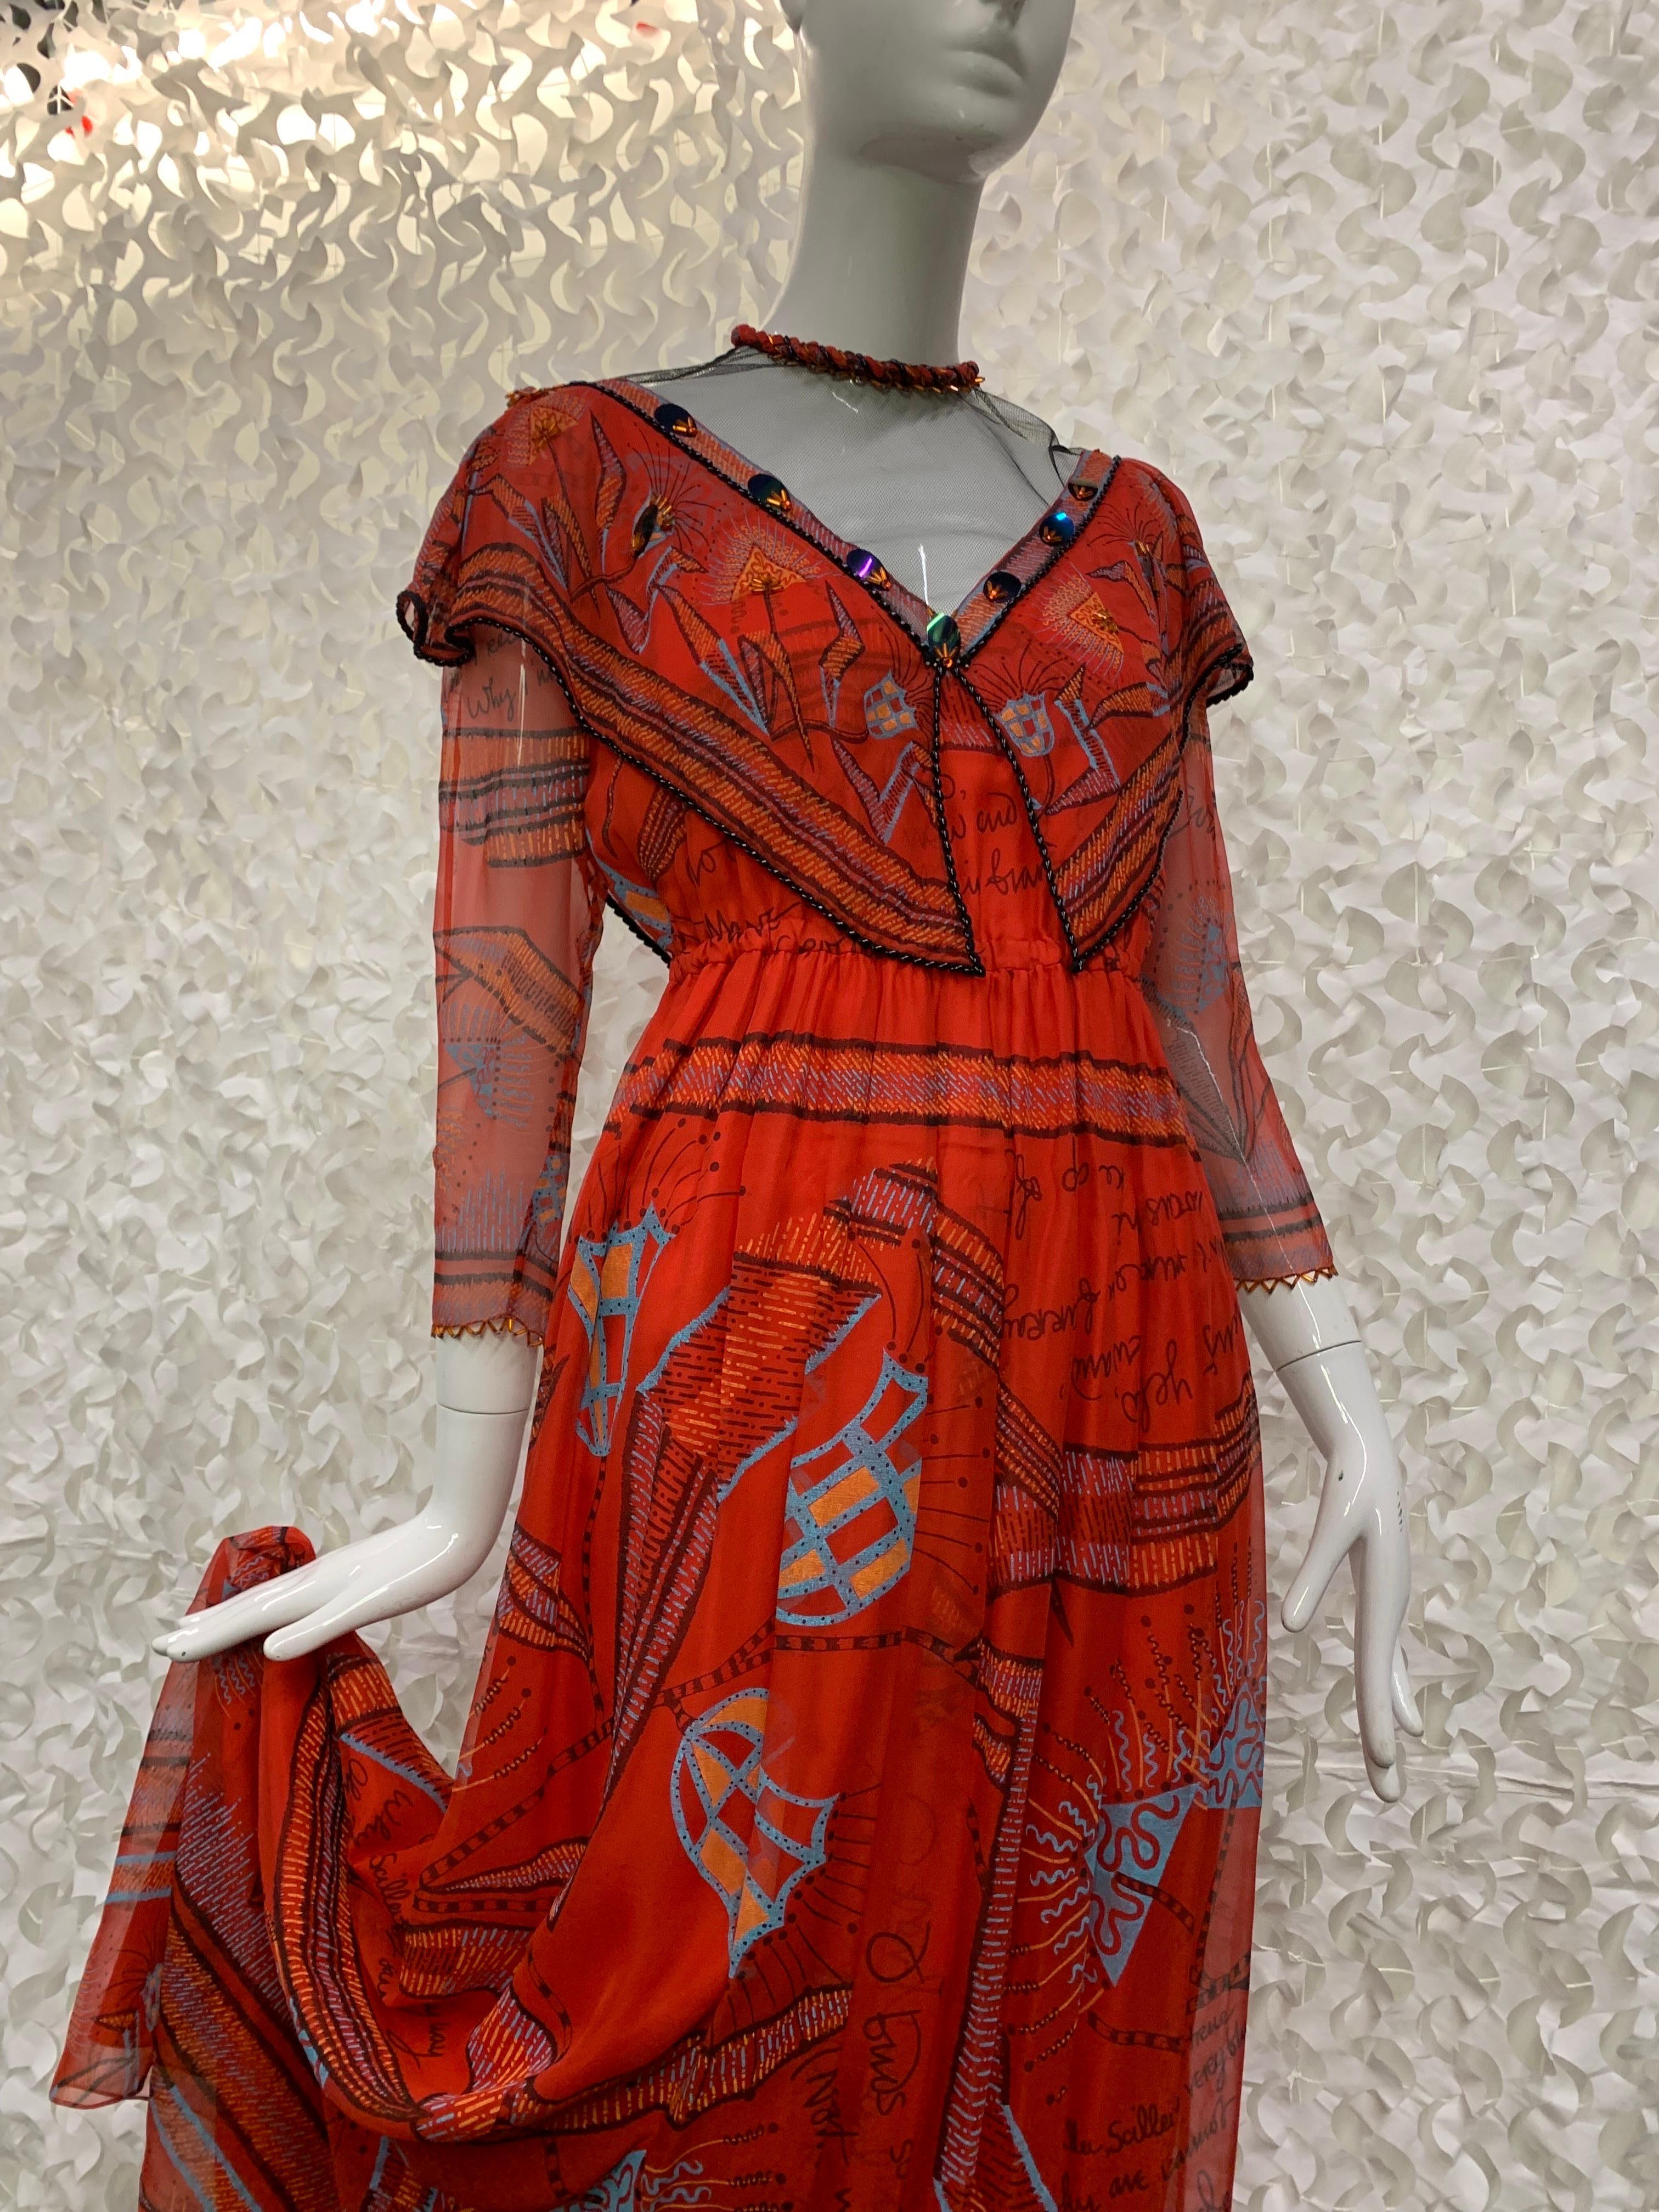 1970s Zandra Rhodes Red Silk Chiffon Print Boho London Maxi Dress w Bead Details.  Victorian revival style typical of Ms. Rhodes classics. Sheer black net décolletage, shawl-style draping at décolletage as well as bead and paillette detail trim.